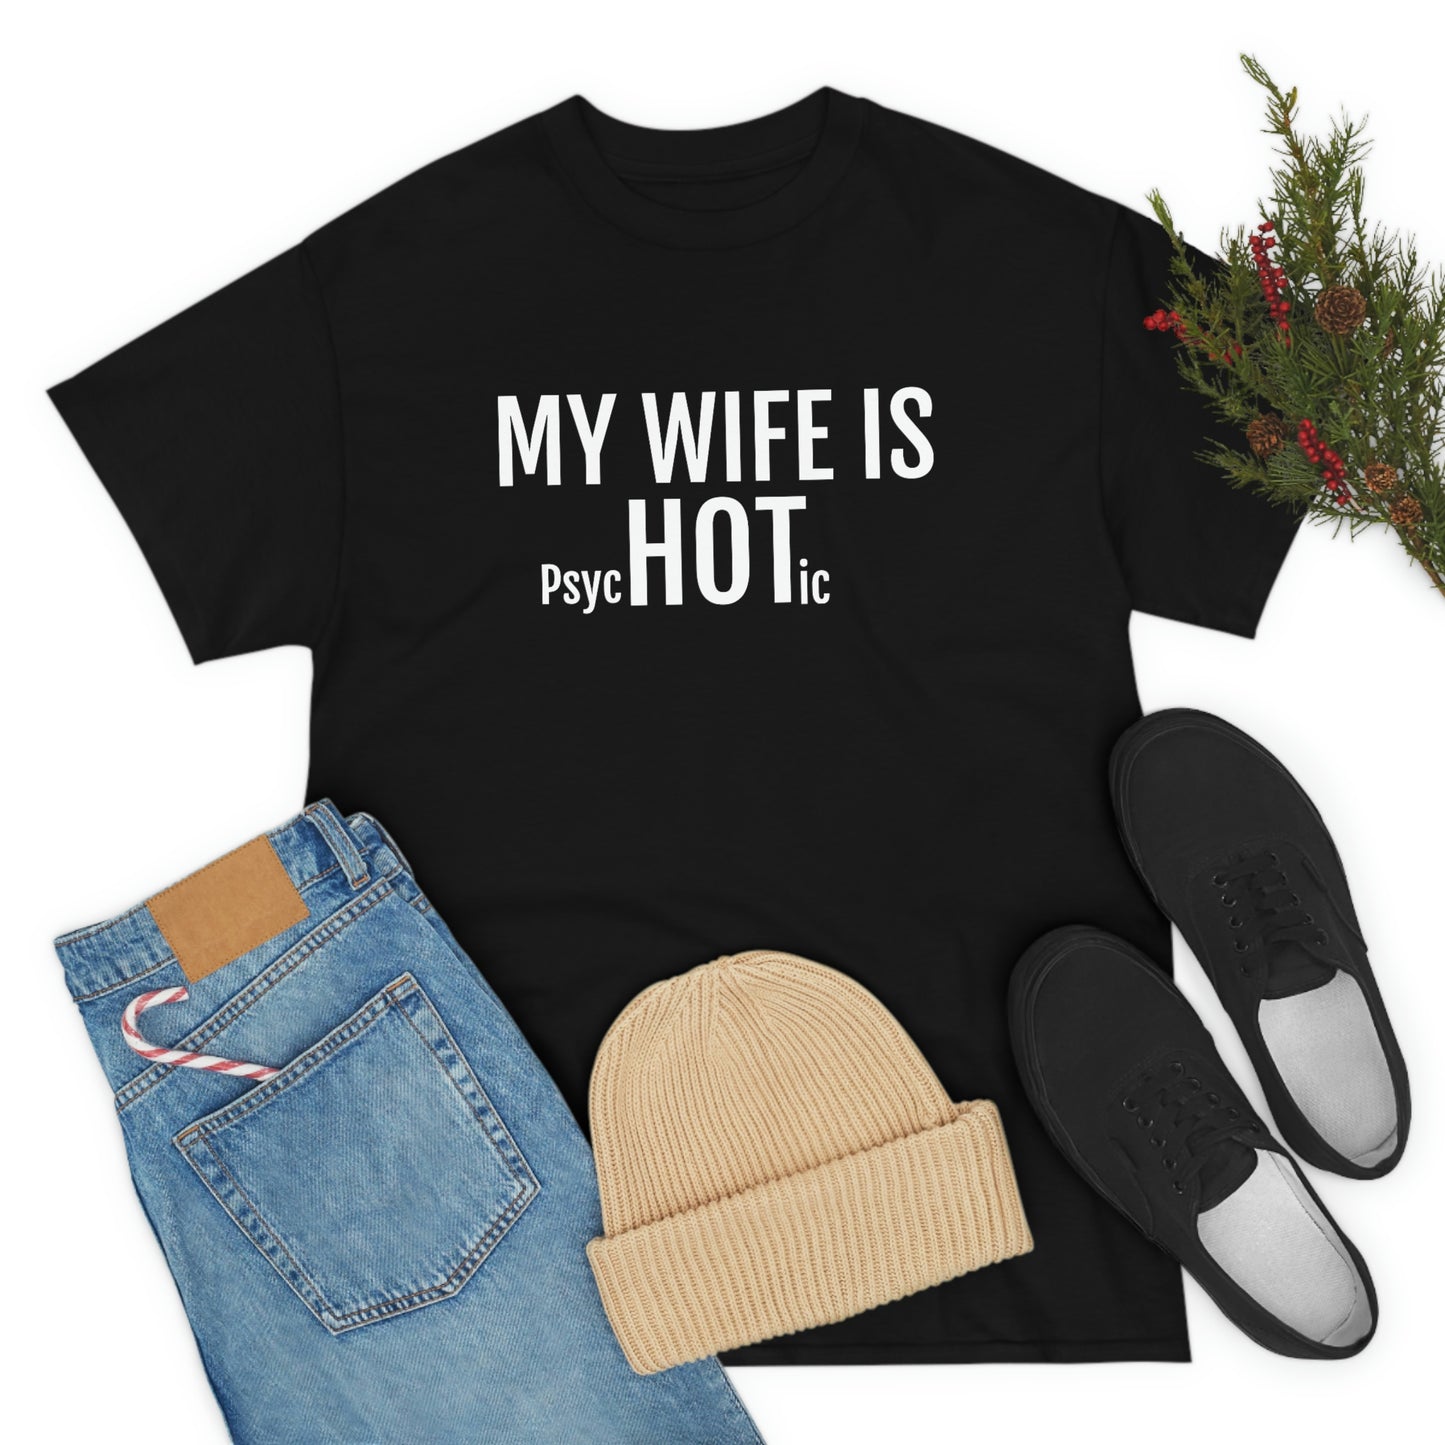 MY WIFE IS PsycHOTic T-SHIRT